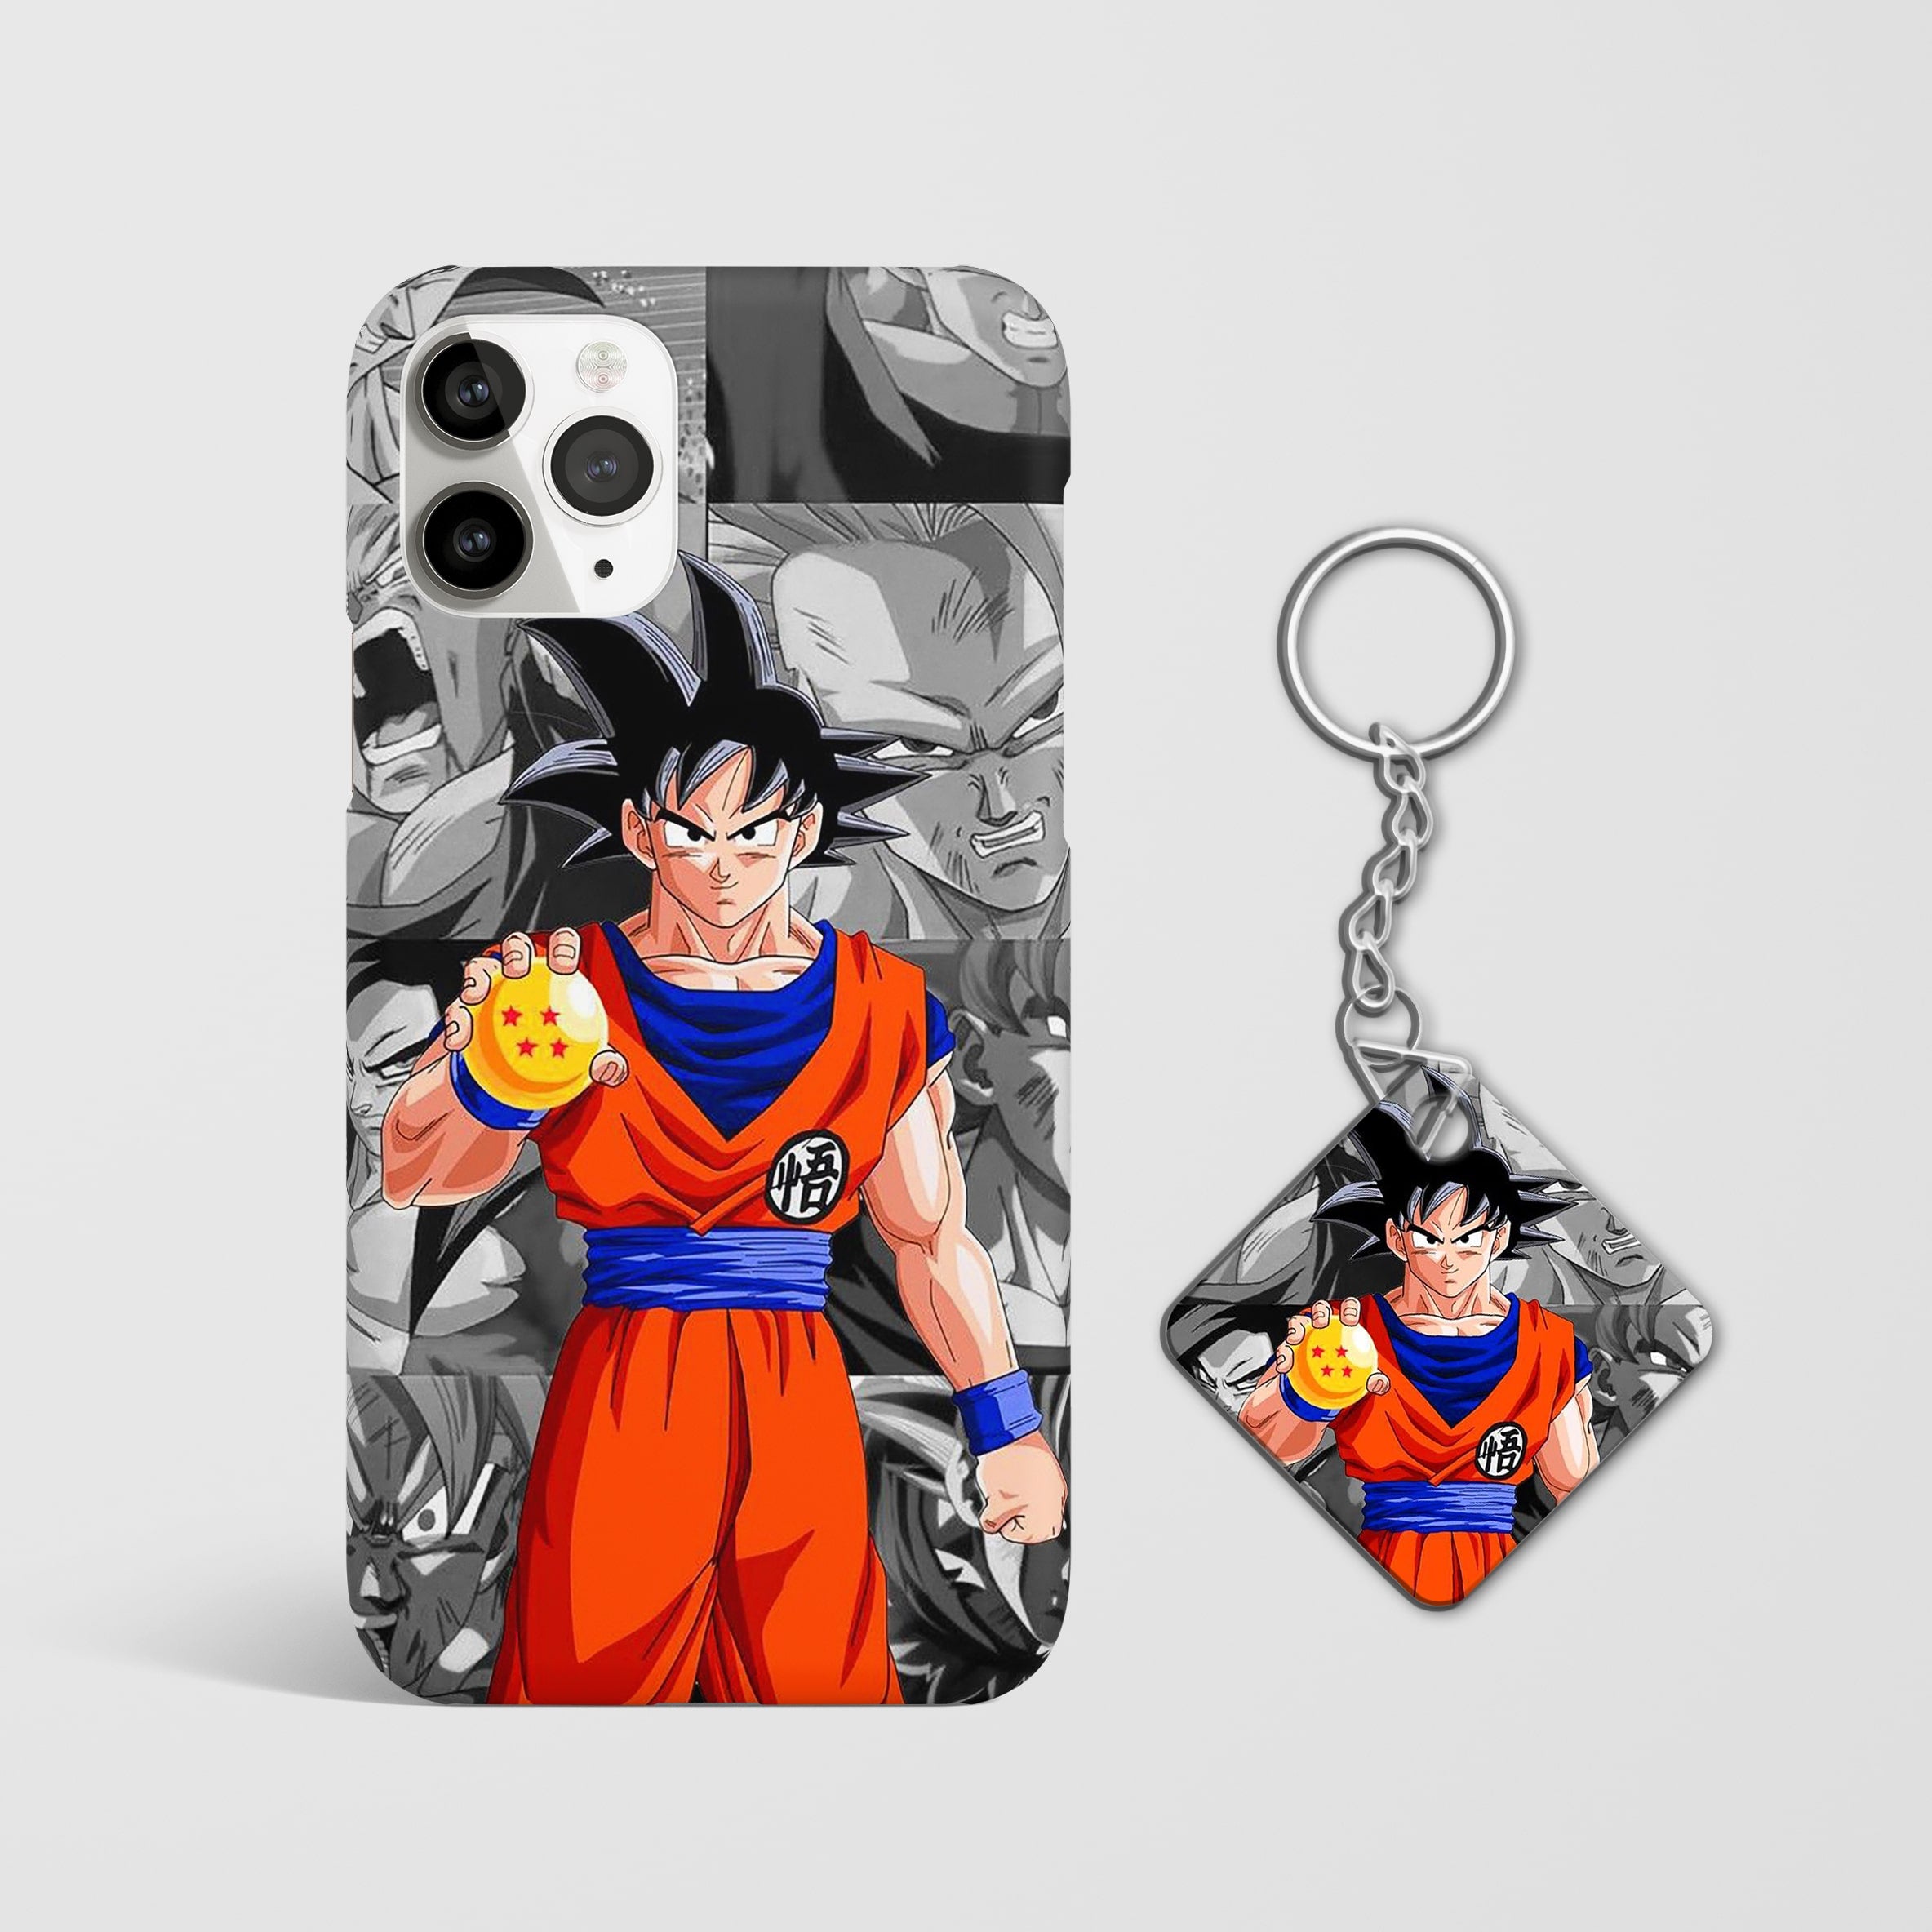 Close-up of Goku's determined expression alongside Dragon Balls on phone case with Keychain.